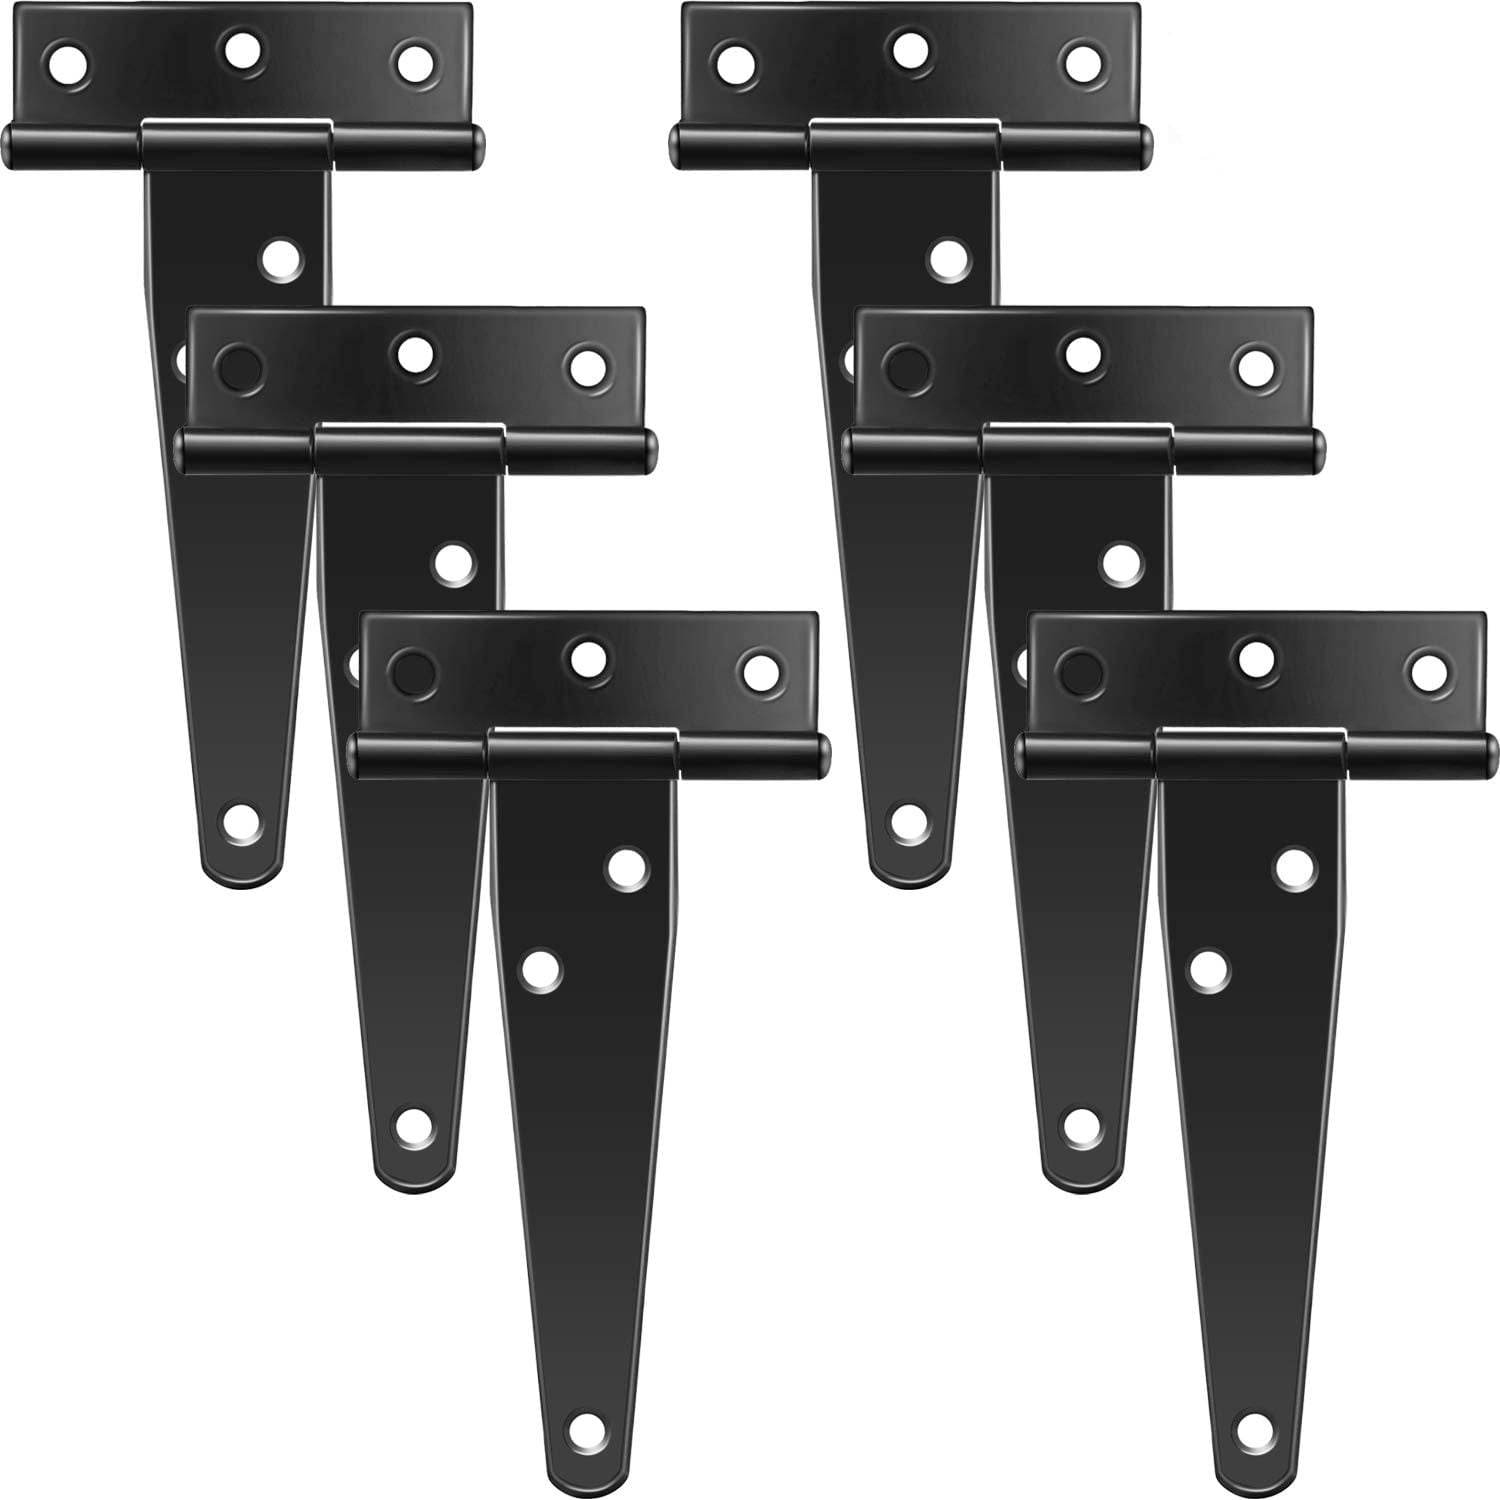 6 inch Black Cold Rolled Iron Rustproof Steel T Hinge Heavy Duty Tee Hinges for Outdoors Garden Gate Sheds Barn Fence Strap Hinges 4 Pack T-Strap Hinges with Screws